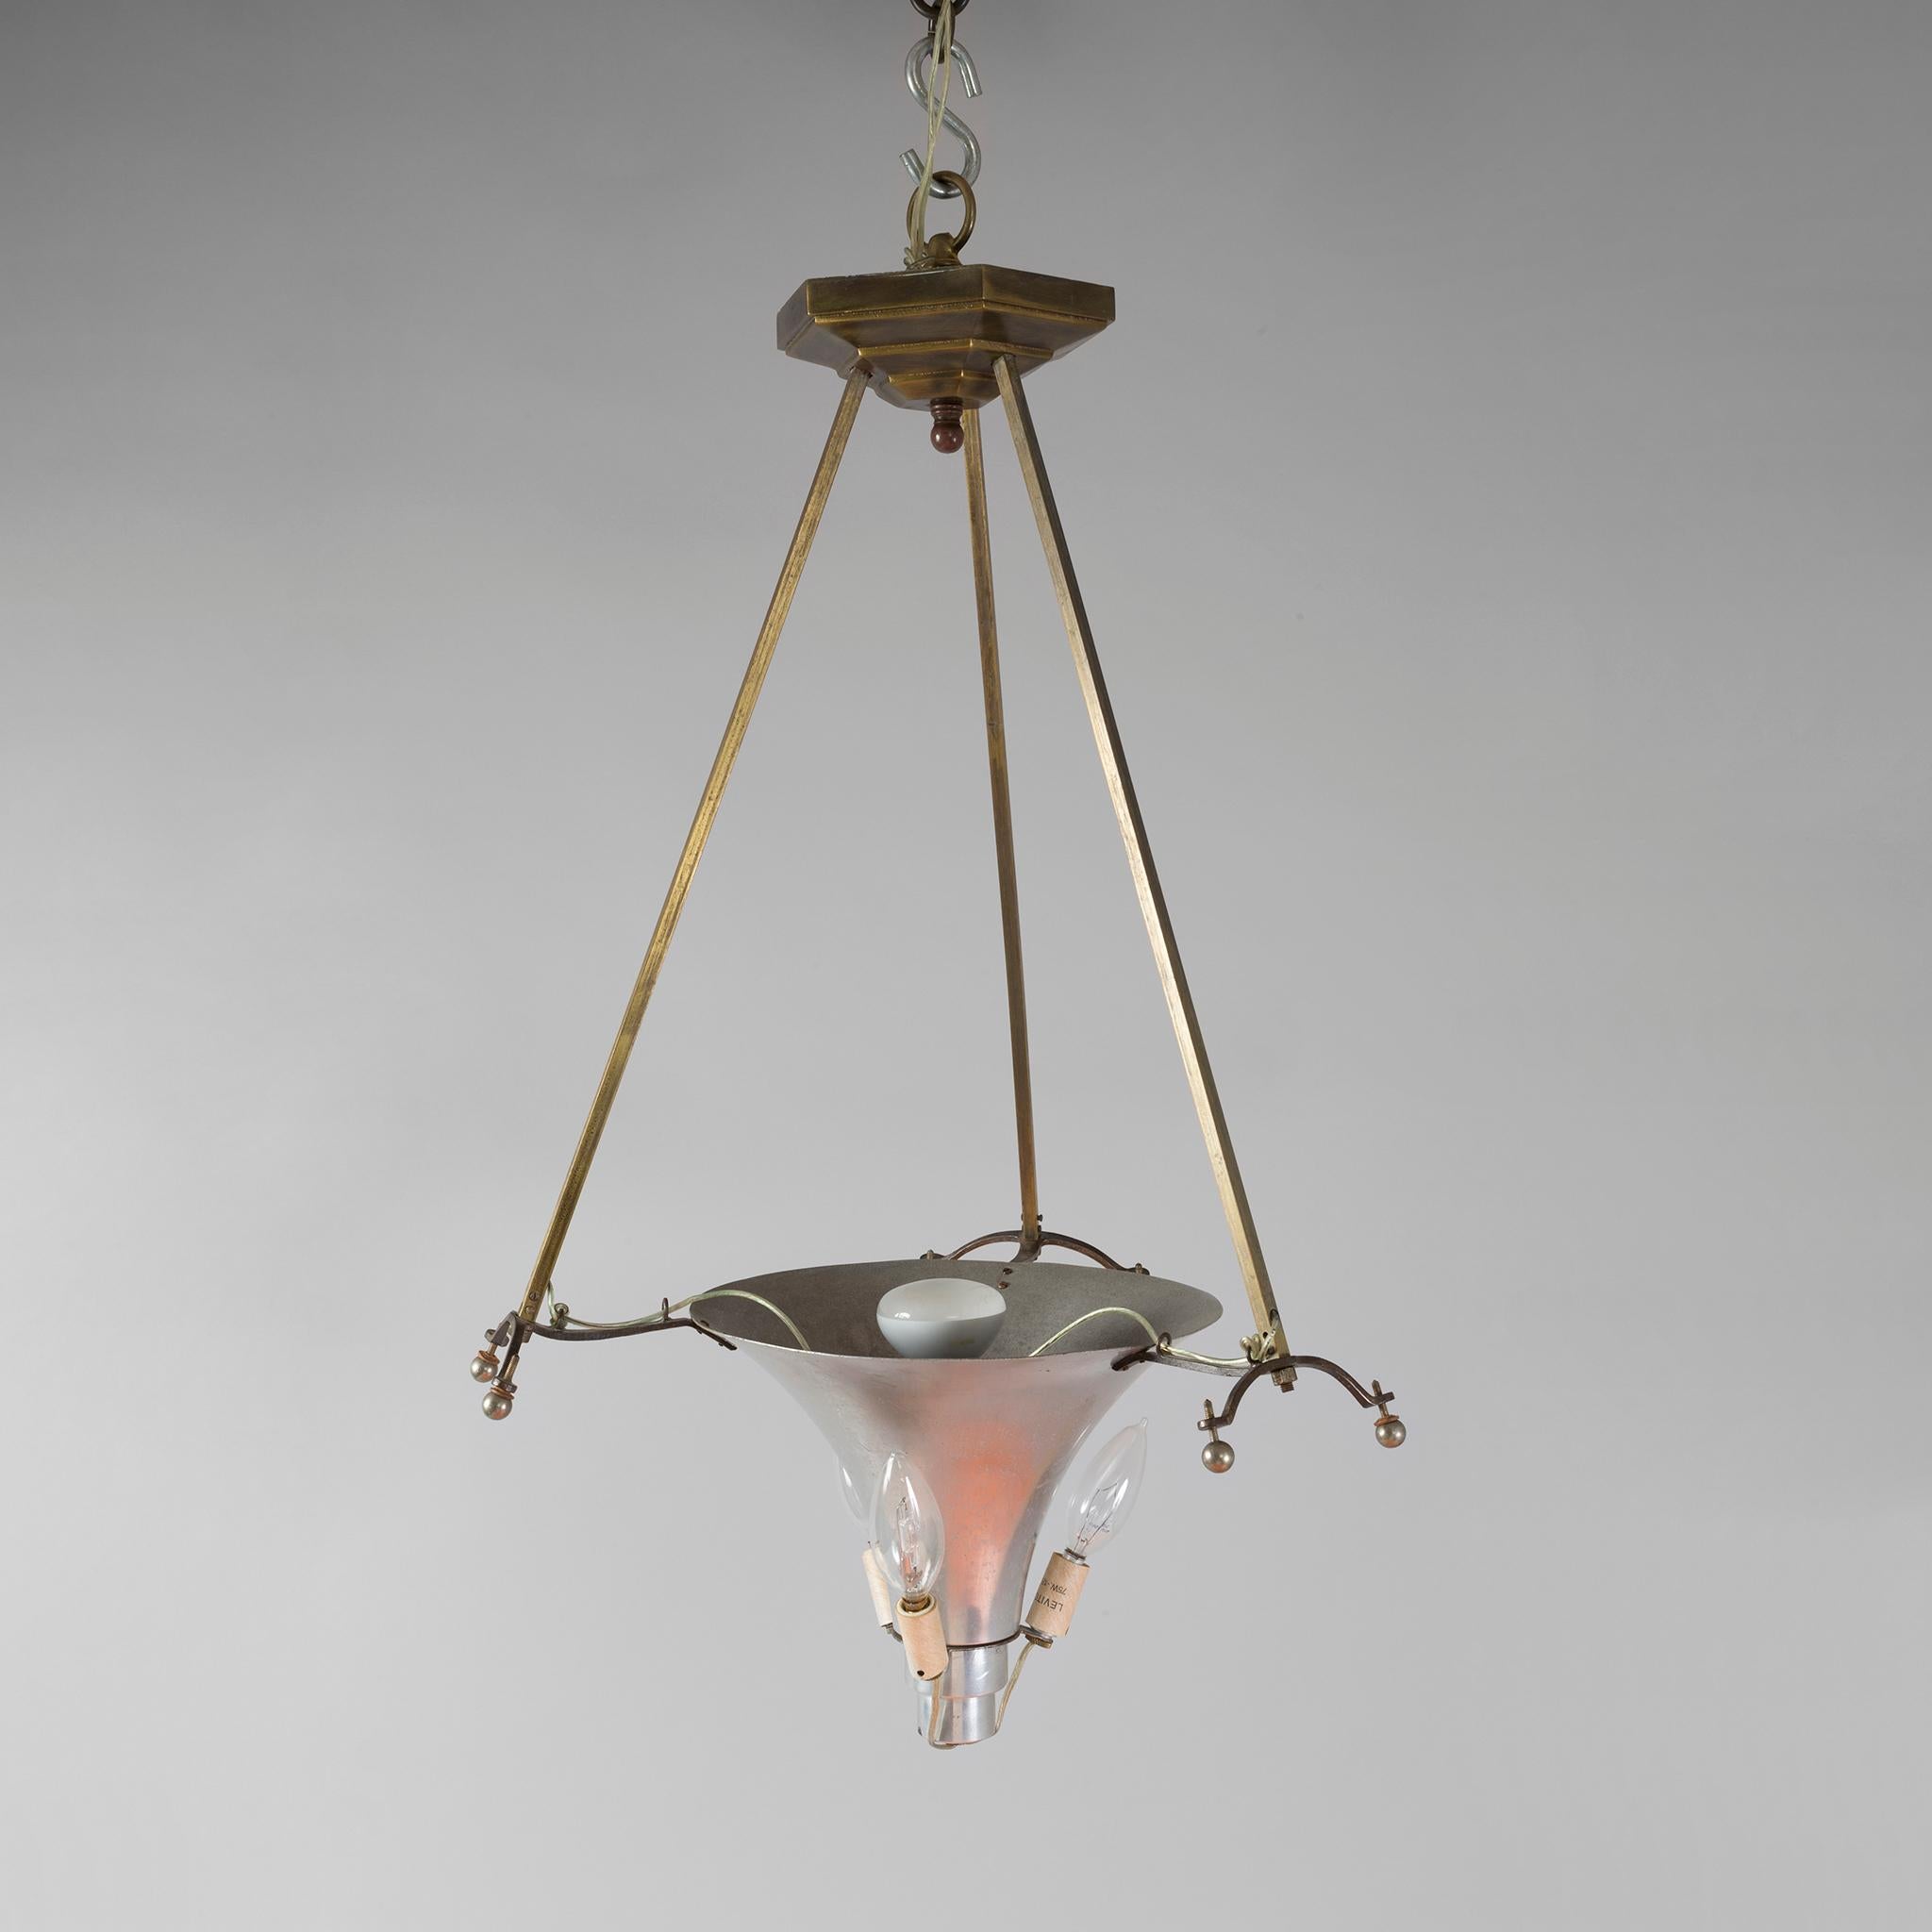 This beautiful chandelier, an superb example of French Art Deco by Daum Nancy, features a reverse bell-shaped shade hangs from three resolute arms in this wonderfully warm and perfectly detailed piece. The richly honey-colored shade is decorated